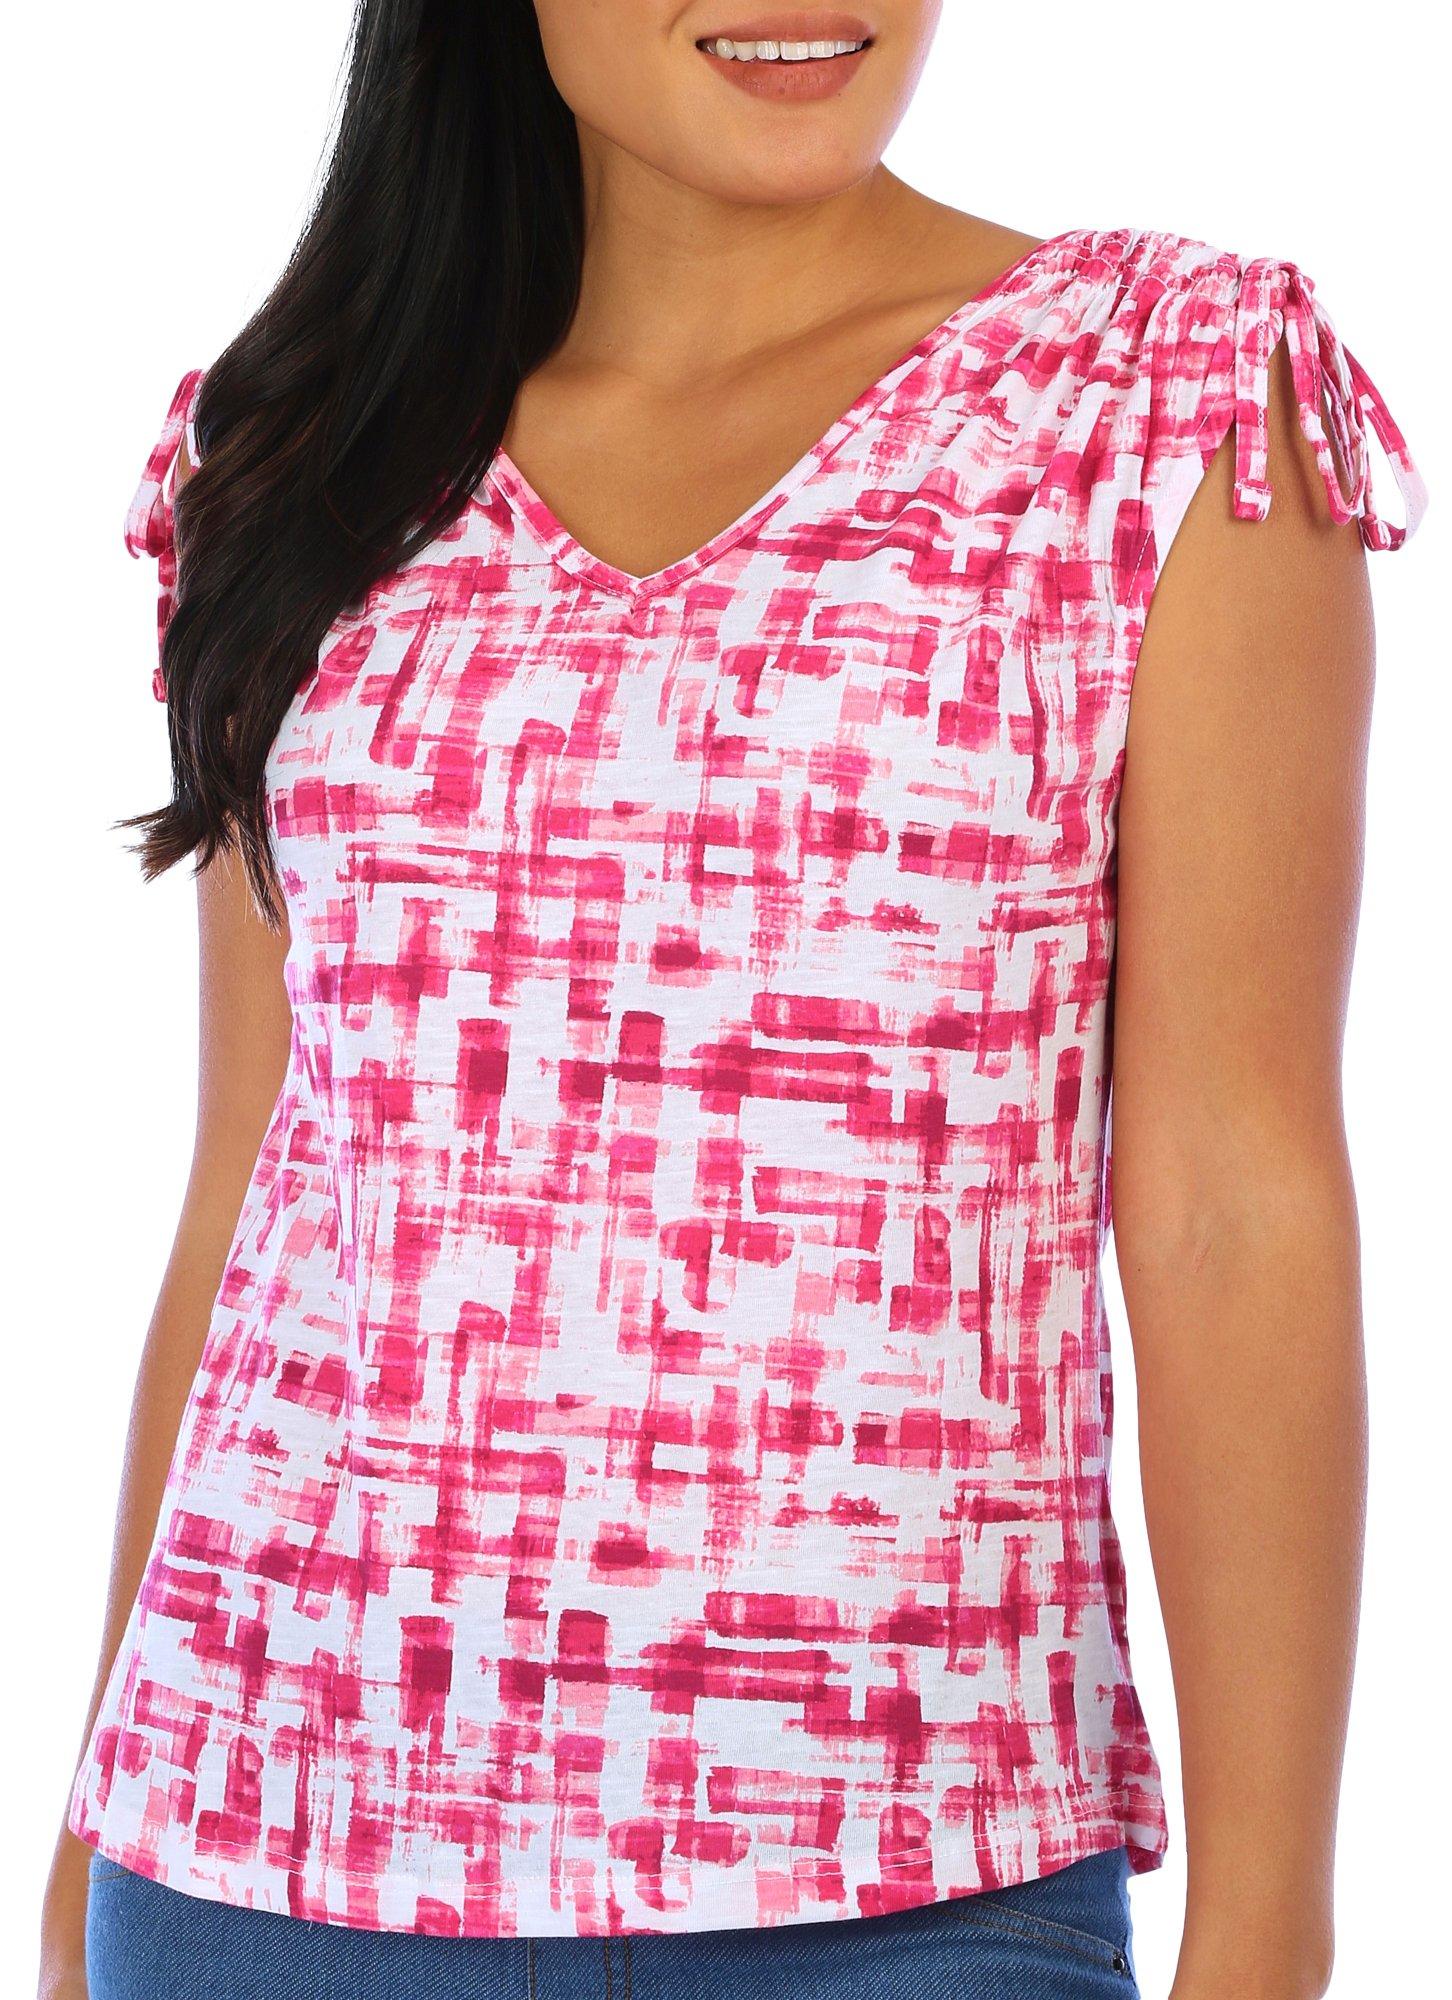 Womens Print Cinched Shoulder Sleeveless Top